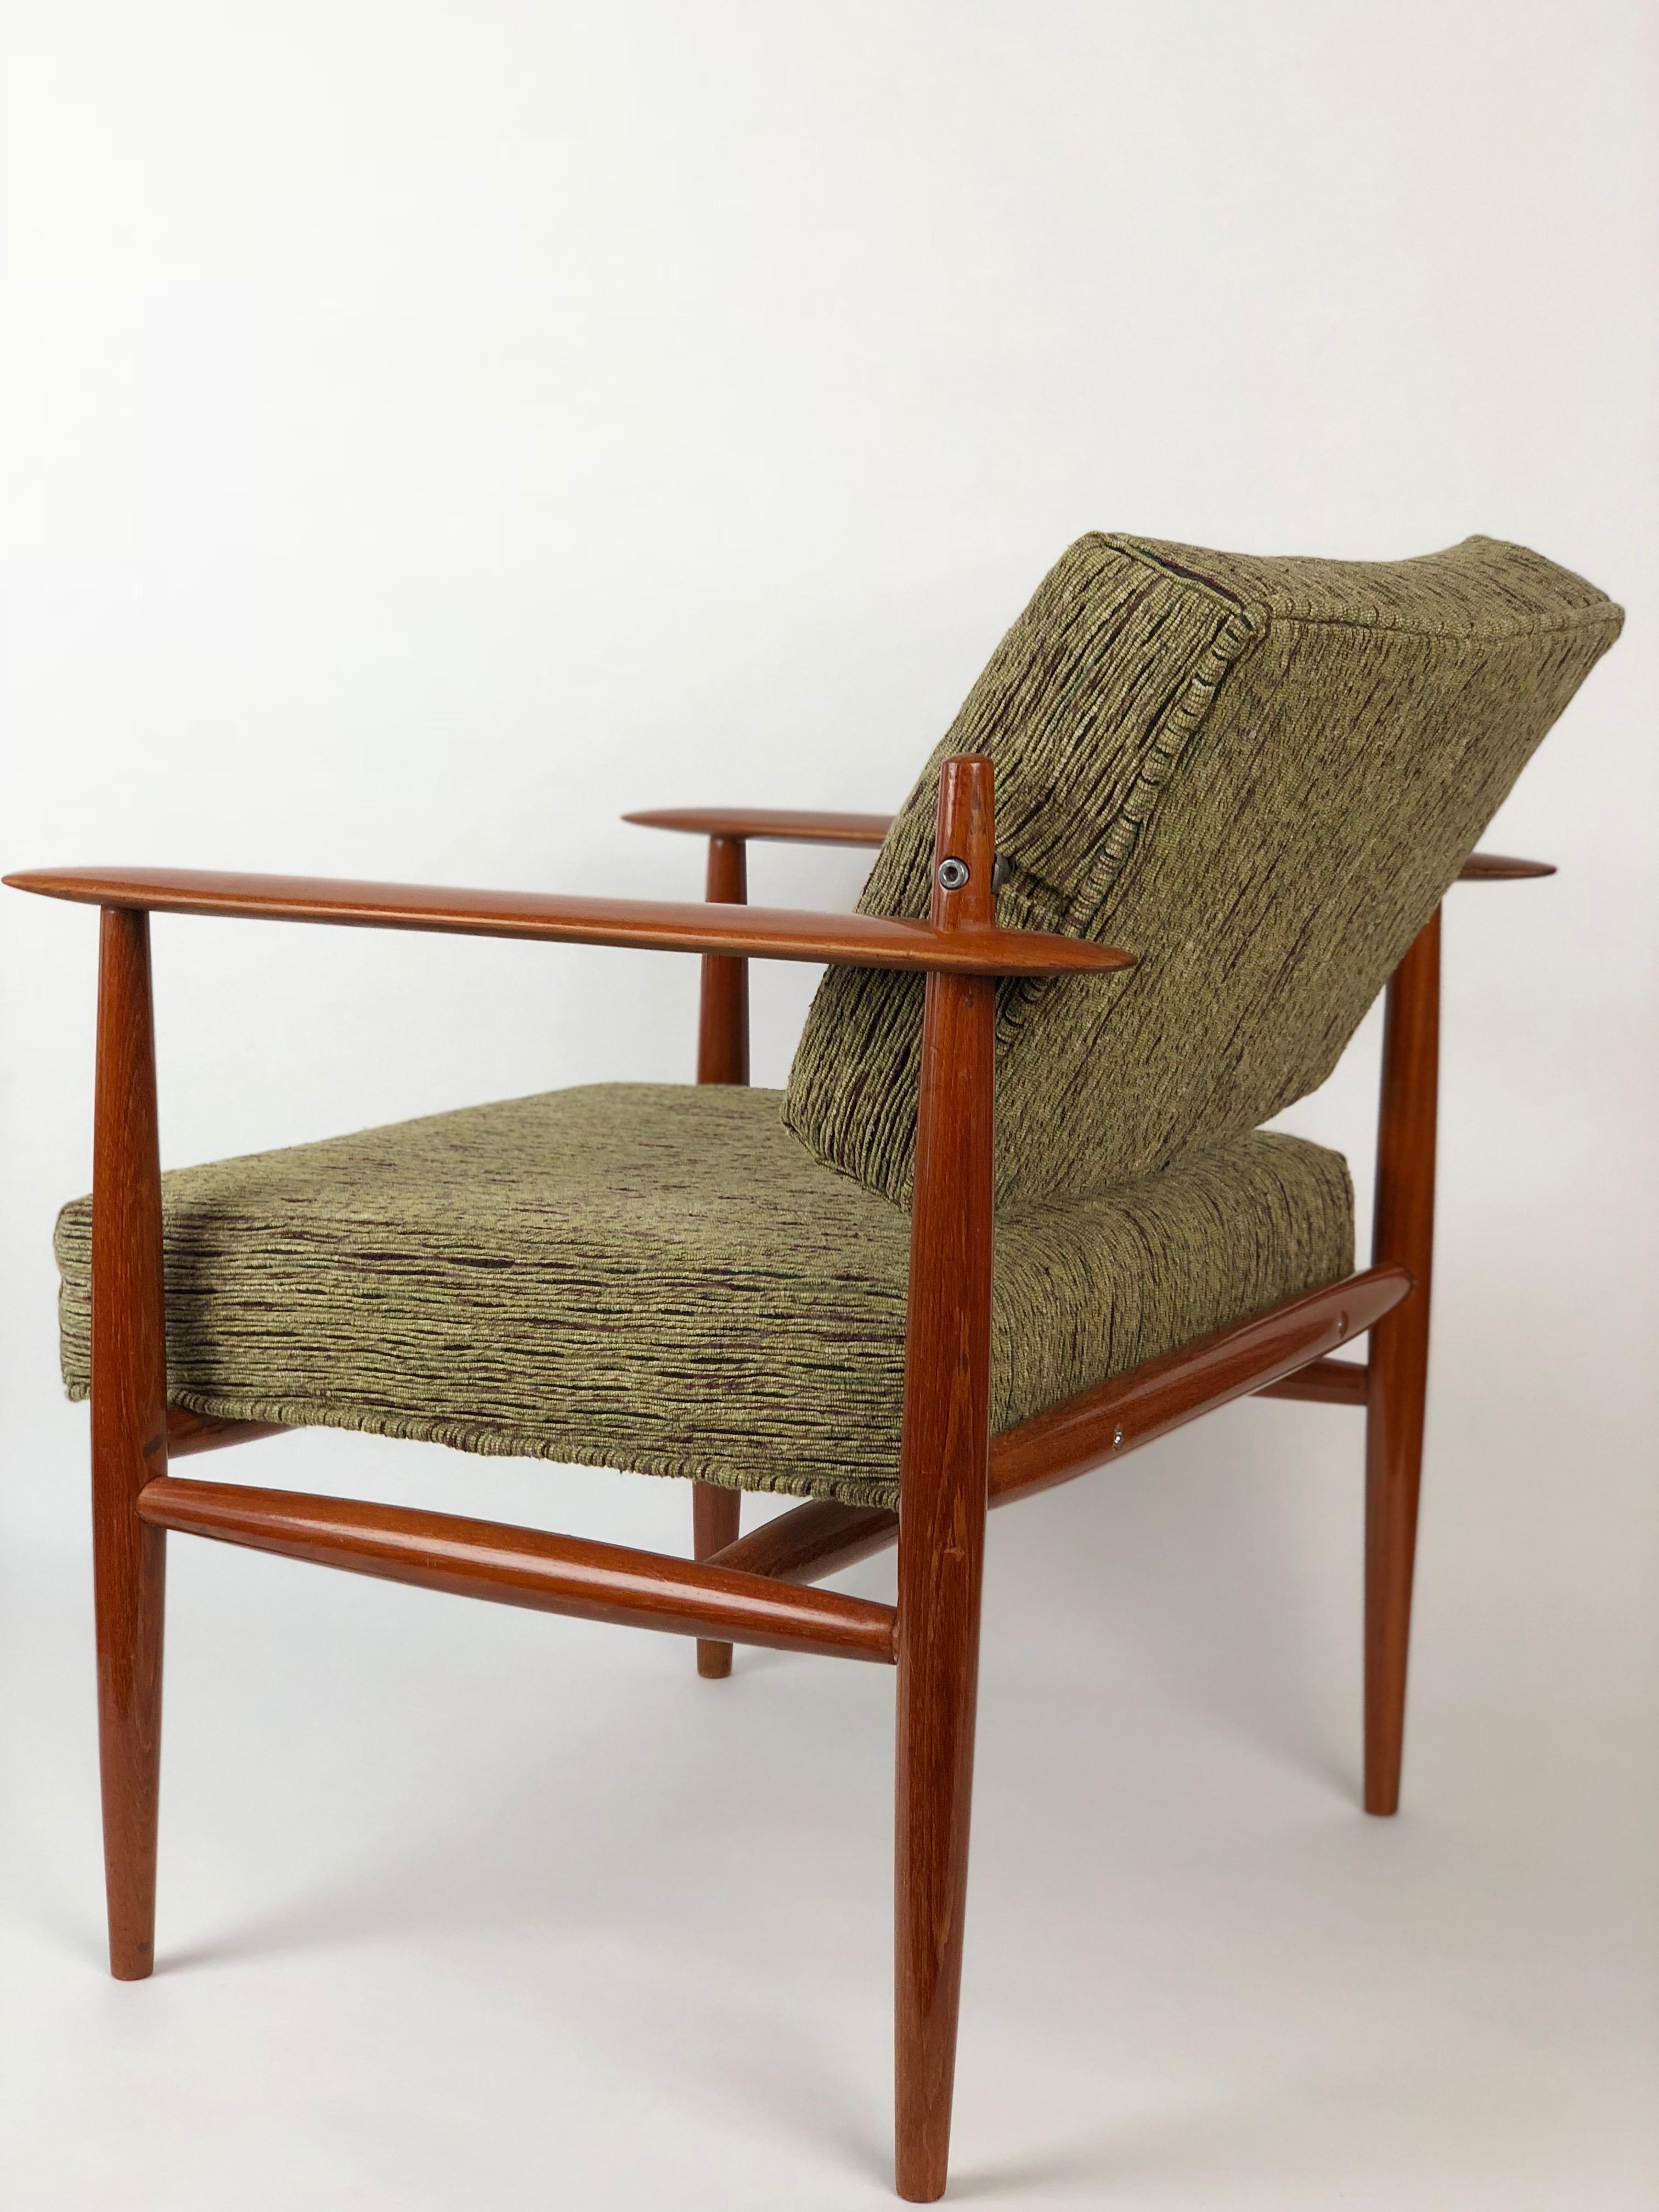 Made in Denmark in the 1960s this pivoting back, teak wood framed lounge chair, features a rotating back that moves with your body position.
The arms are surfboard style. The chair has been upholstered in a Rubelli fabric.